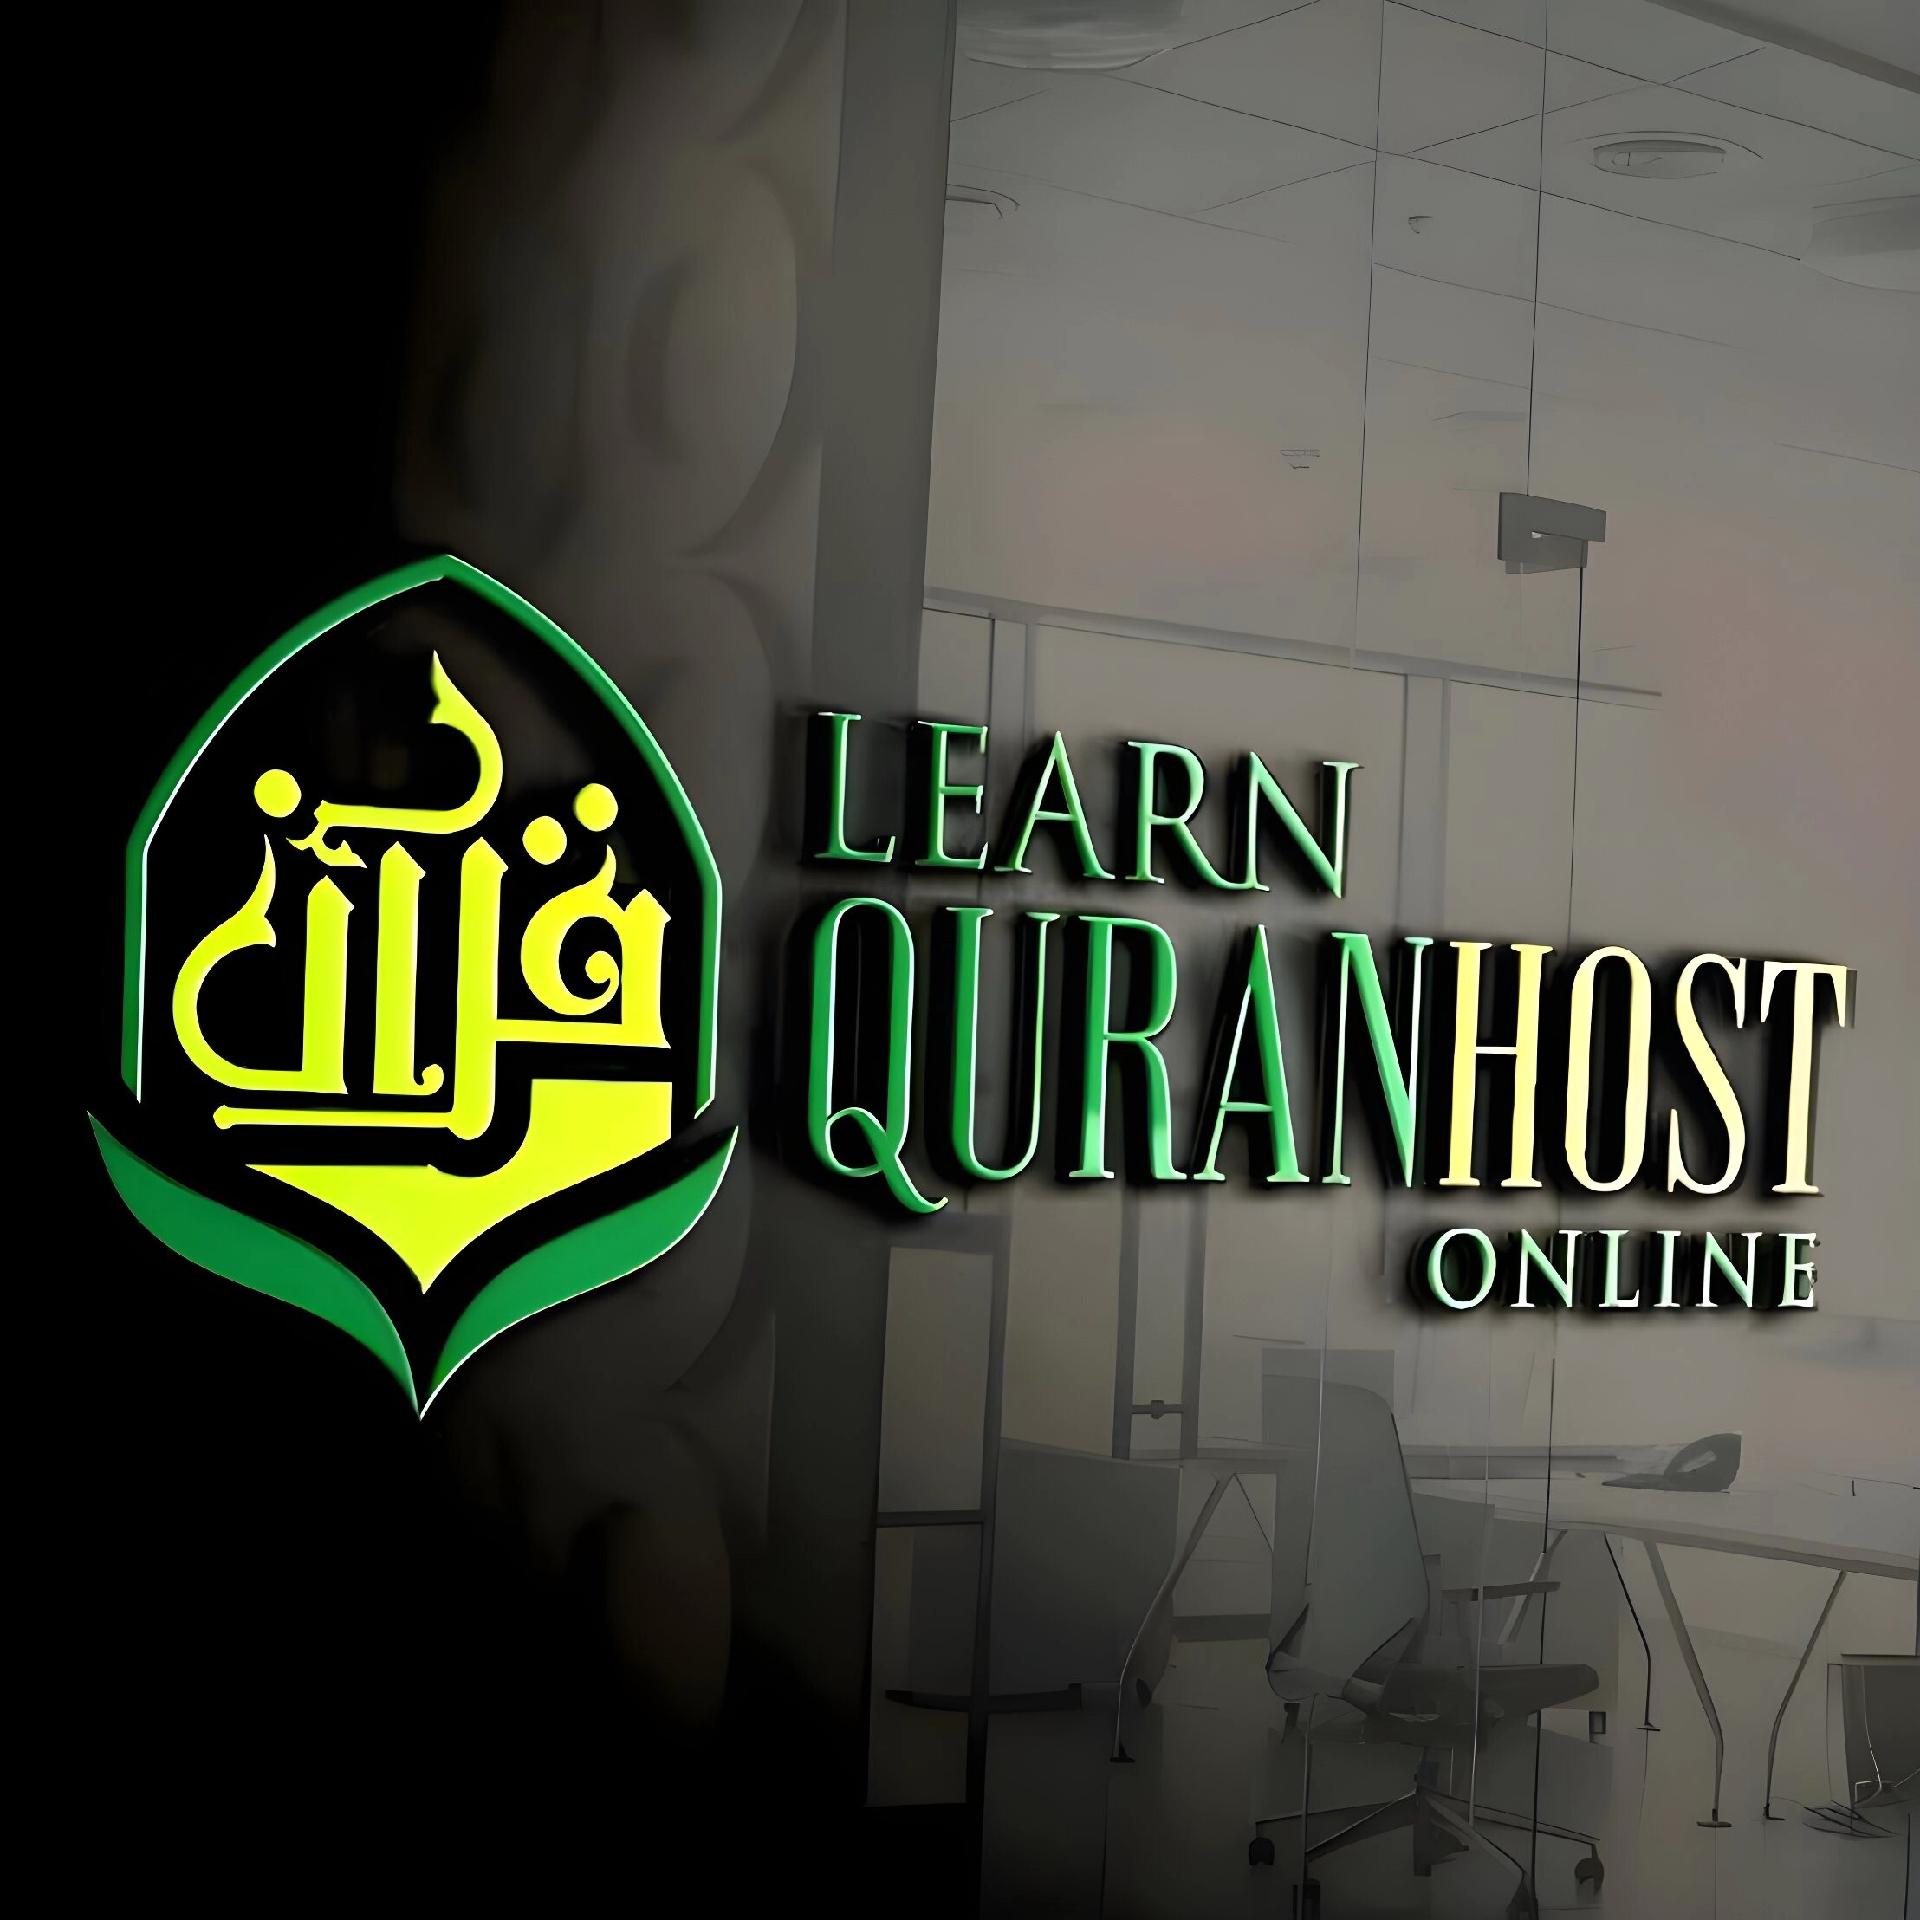 Quran Academy's images